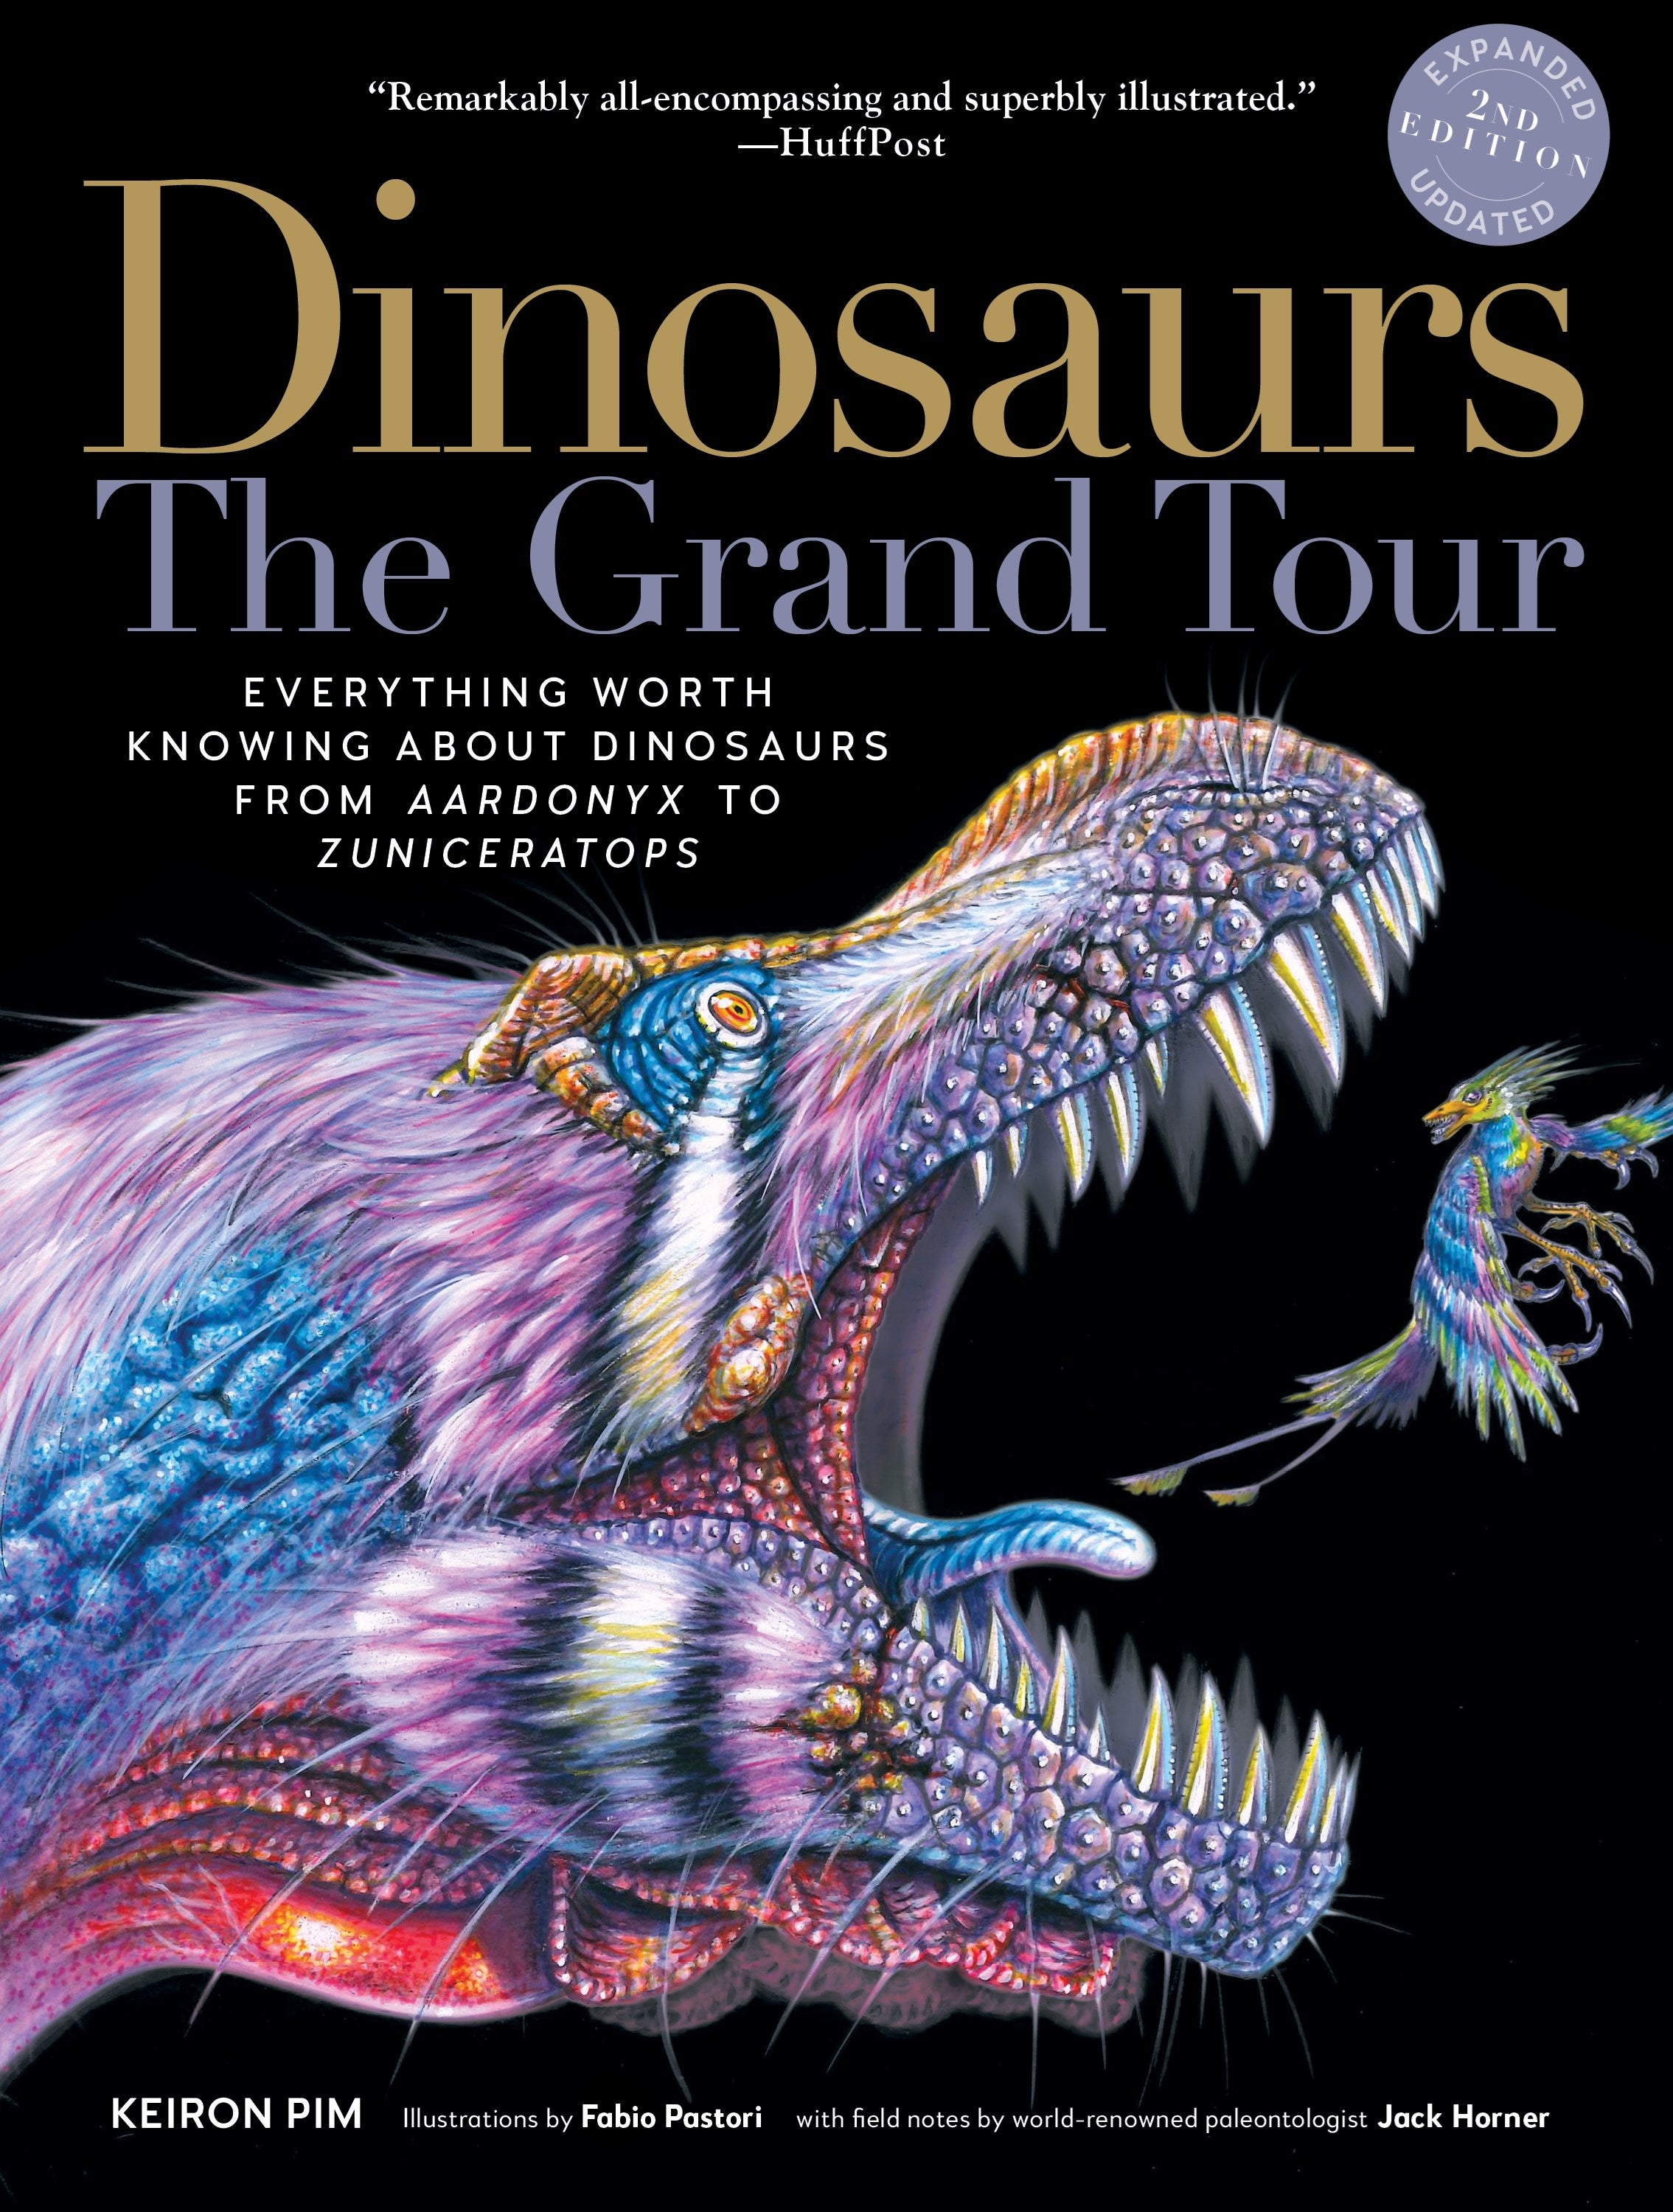 Dinosaurs—The Grand Tour, Second Edition: Everything Worth Knowing About Dinosaurs from Aardonyx to Zuniceratops (2nd Edition)